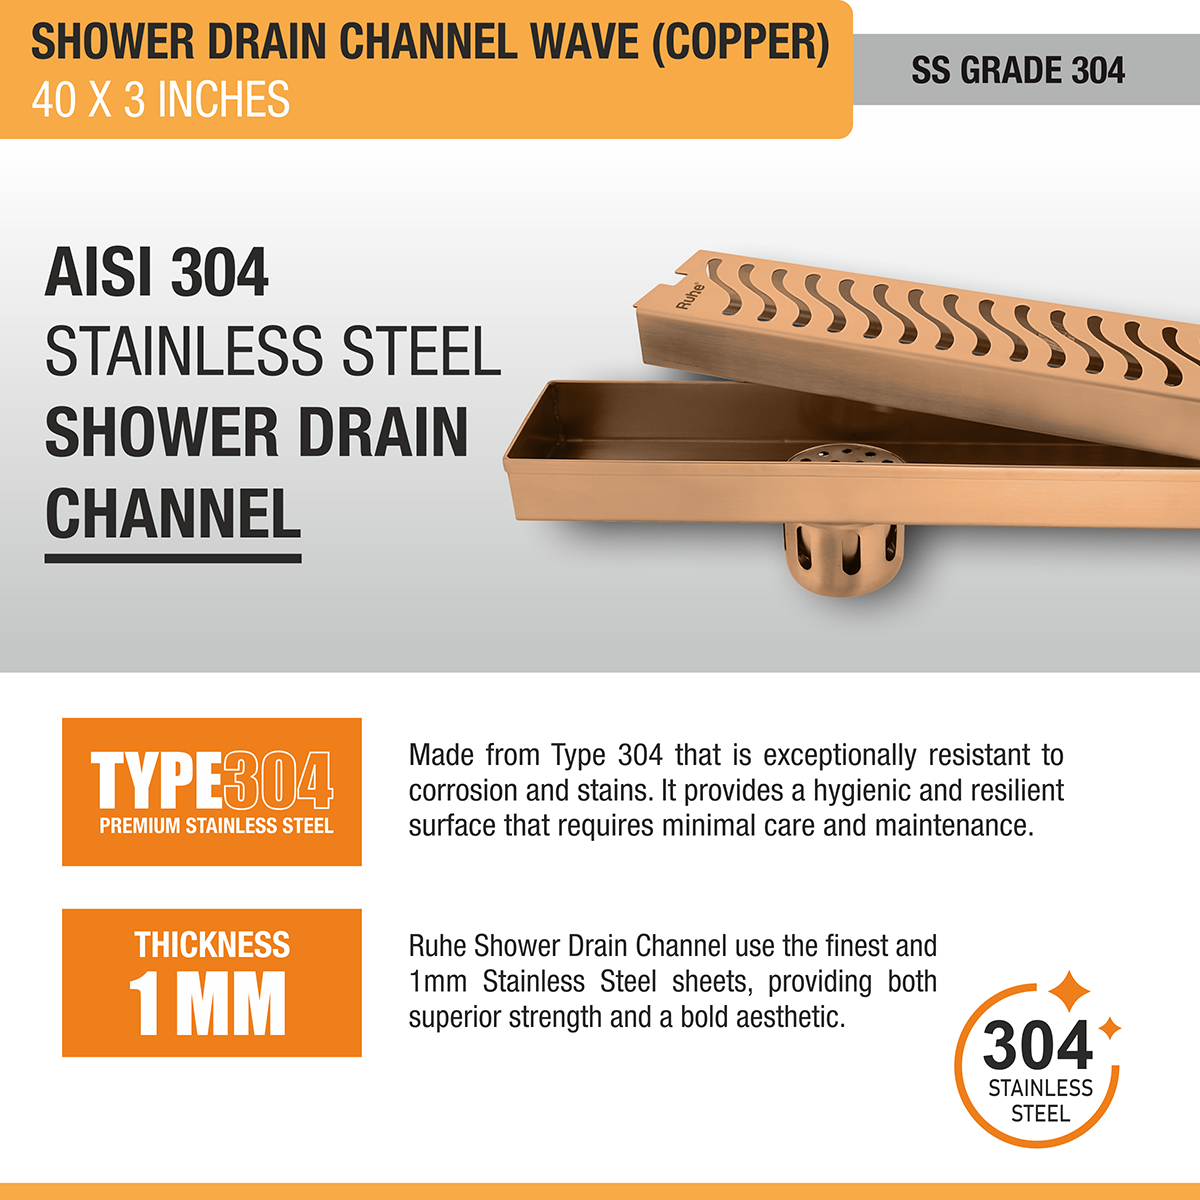 Wave Shower Drain Channel (40 x 3 Inches) ROSE GOLD/ANTIQUE COPPER stainless steel